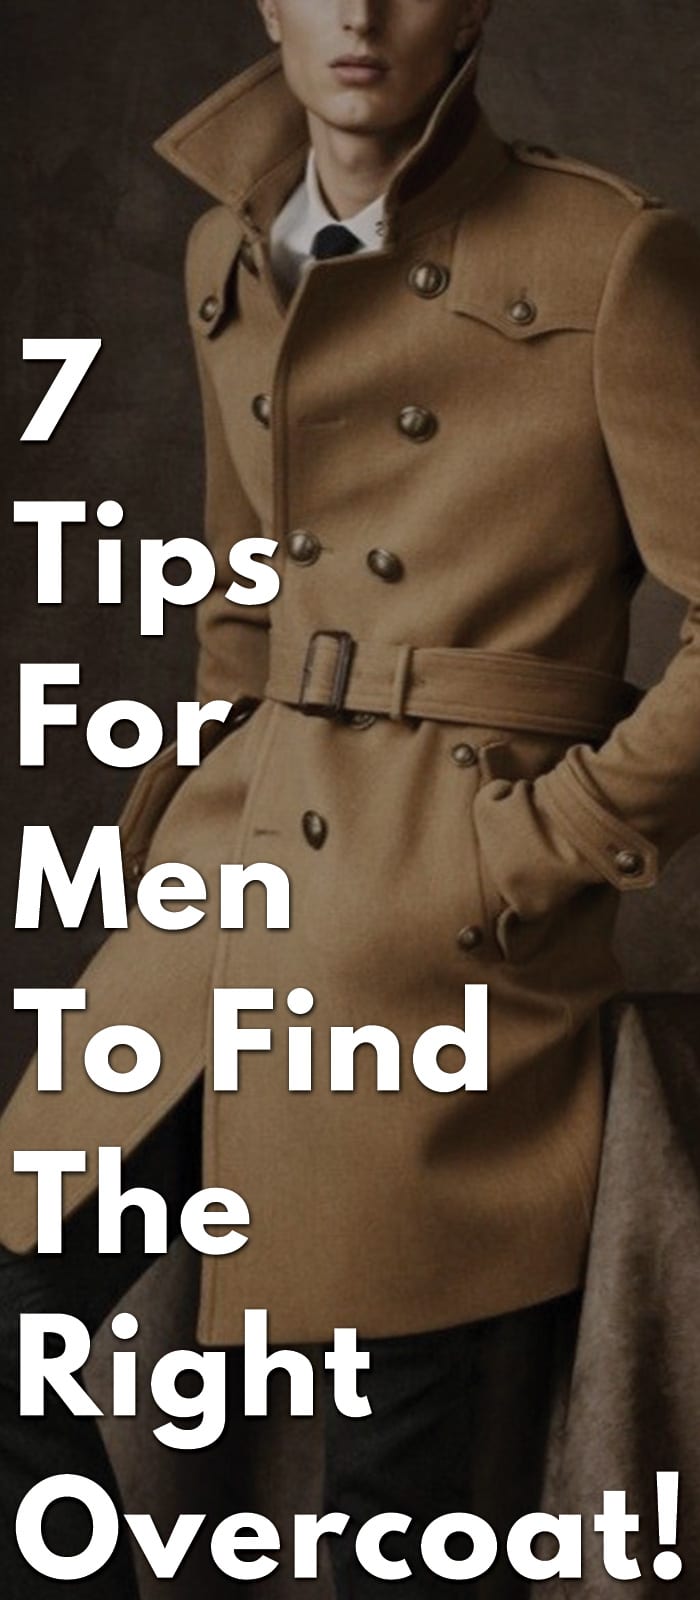 7-Tips-For-Men-To-Find-The-Right-Overcoat!